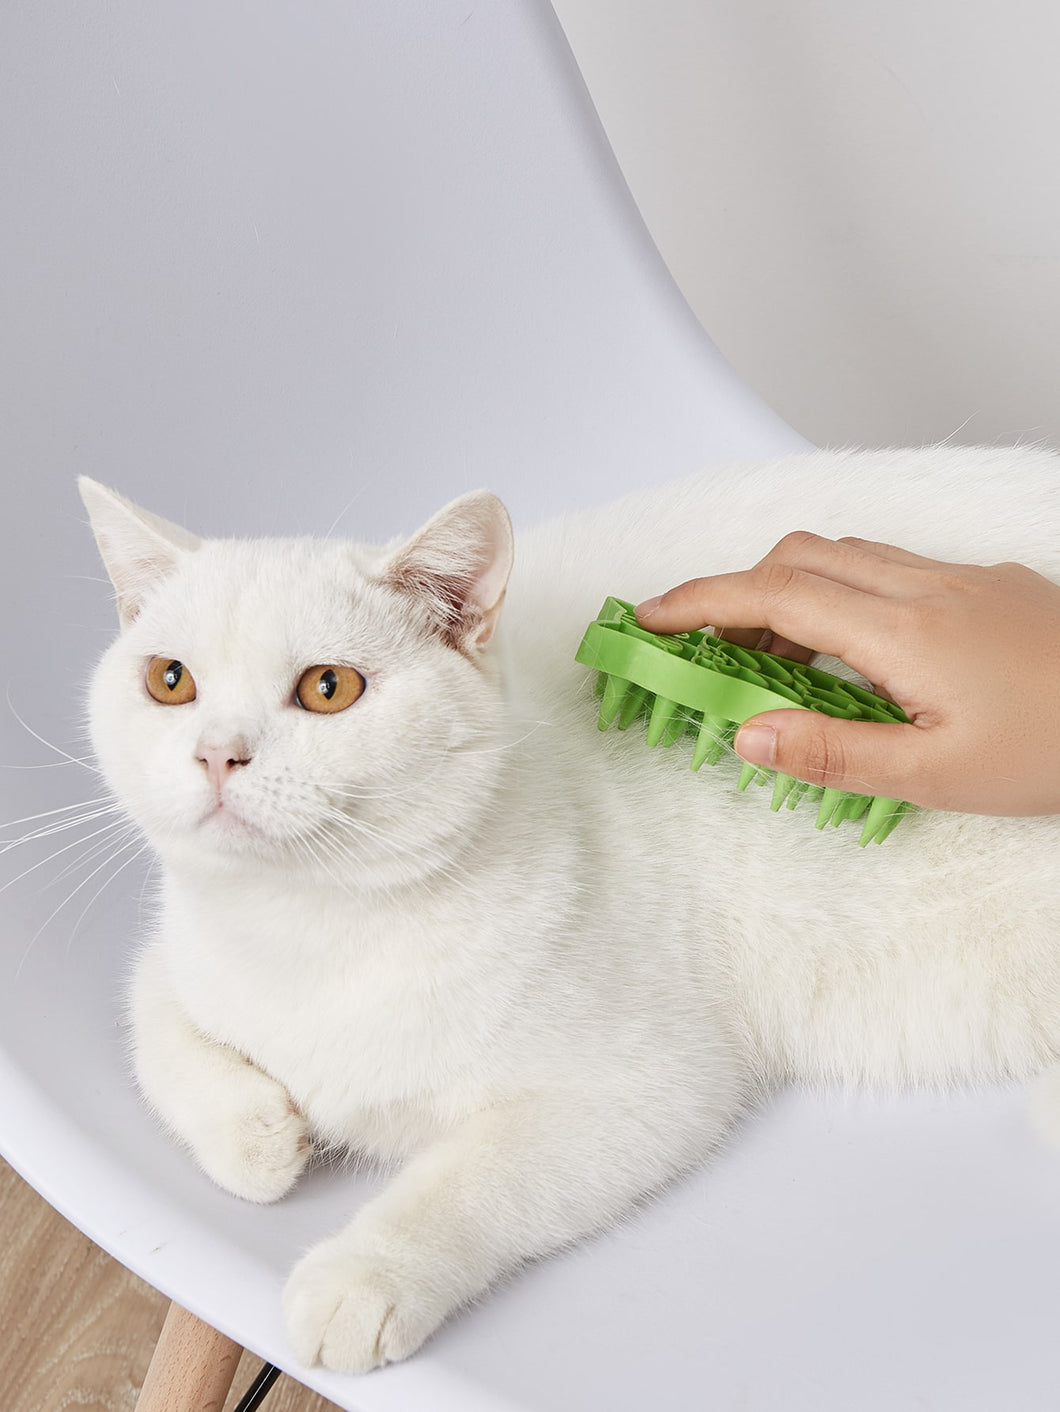 'Cat Shaped Pet Hair Brush' Pamper your cat by combing his furry coat with this soft brush, easy to wash and light to take with you! Colour: Red or Green Pattern Type: Plain Material: Rubber Applicable Pet: Cat/Dog